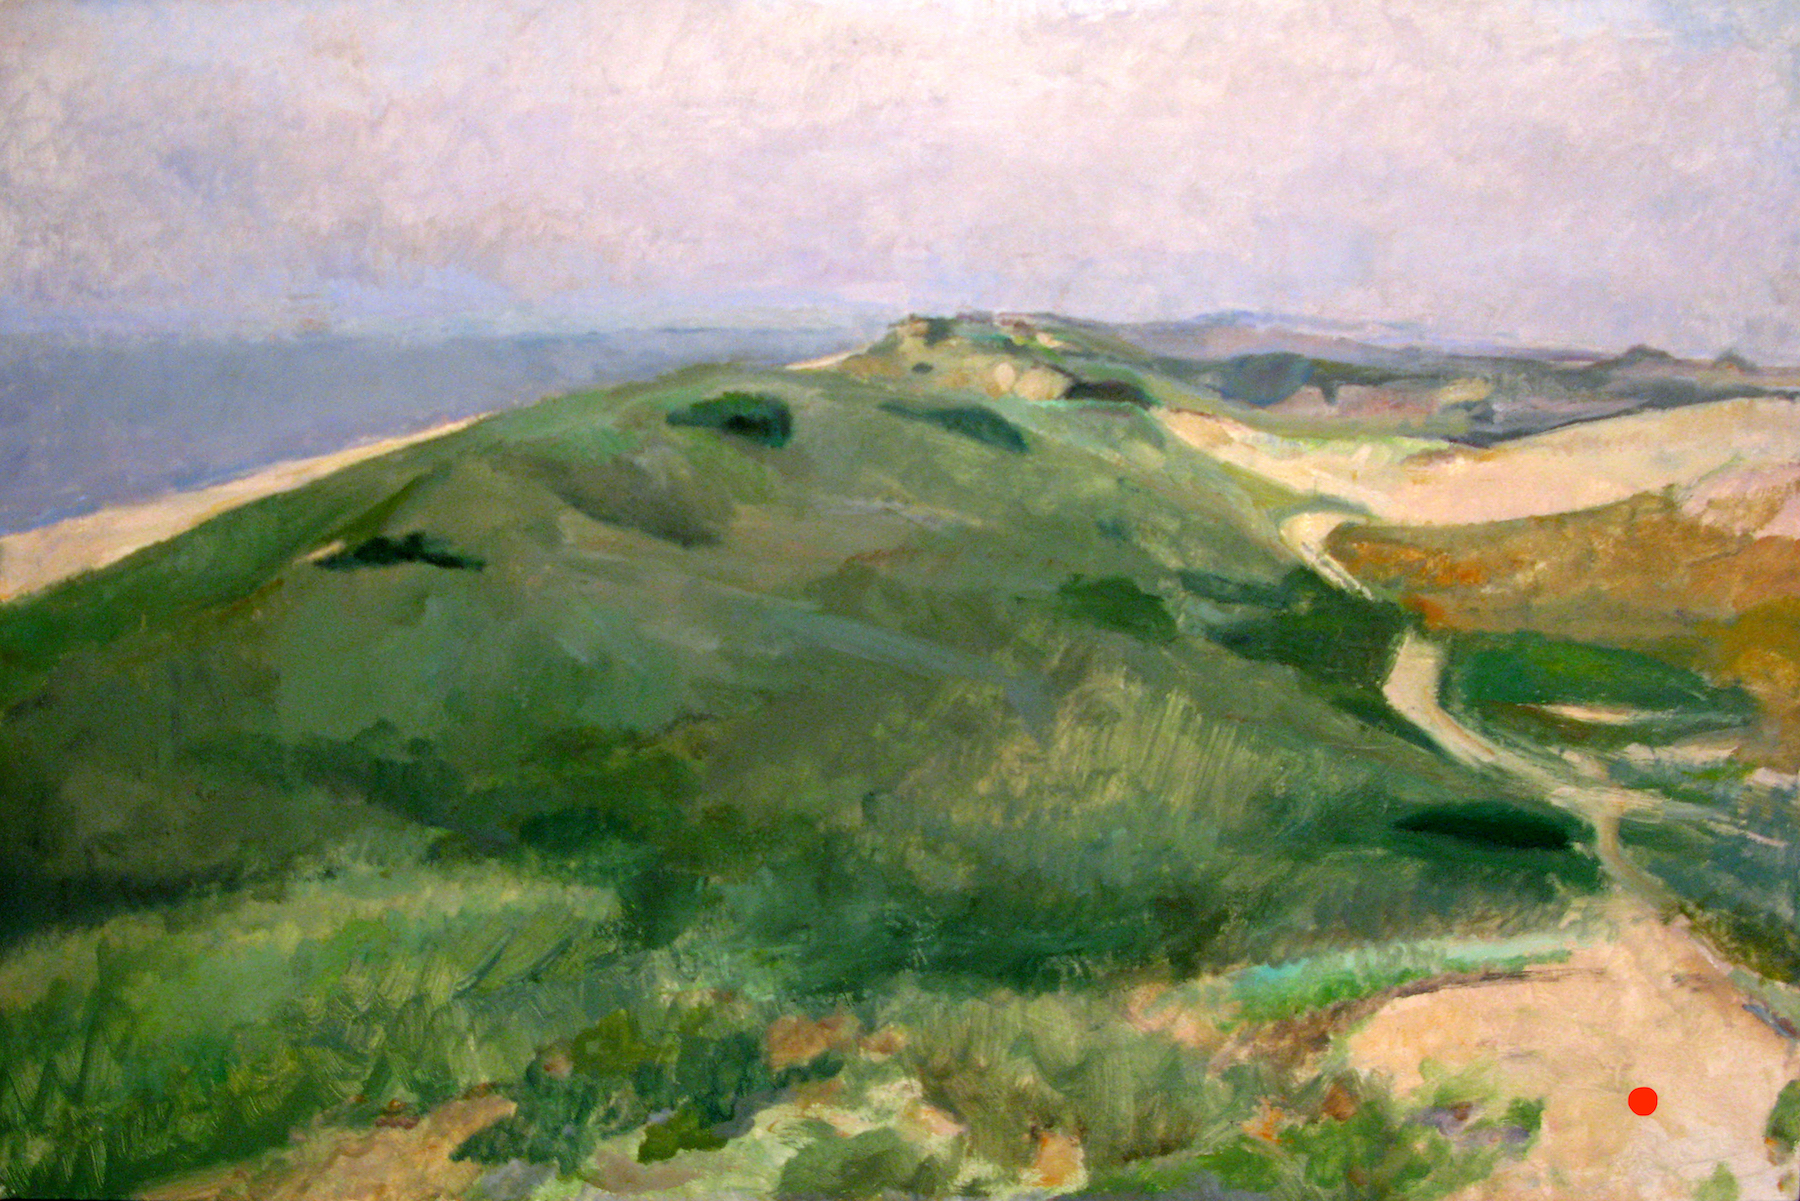 Barrier Dune, 25 x 39 inches, oil on linen, 2004.